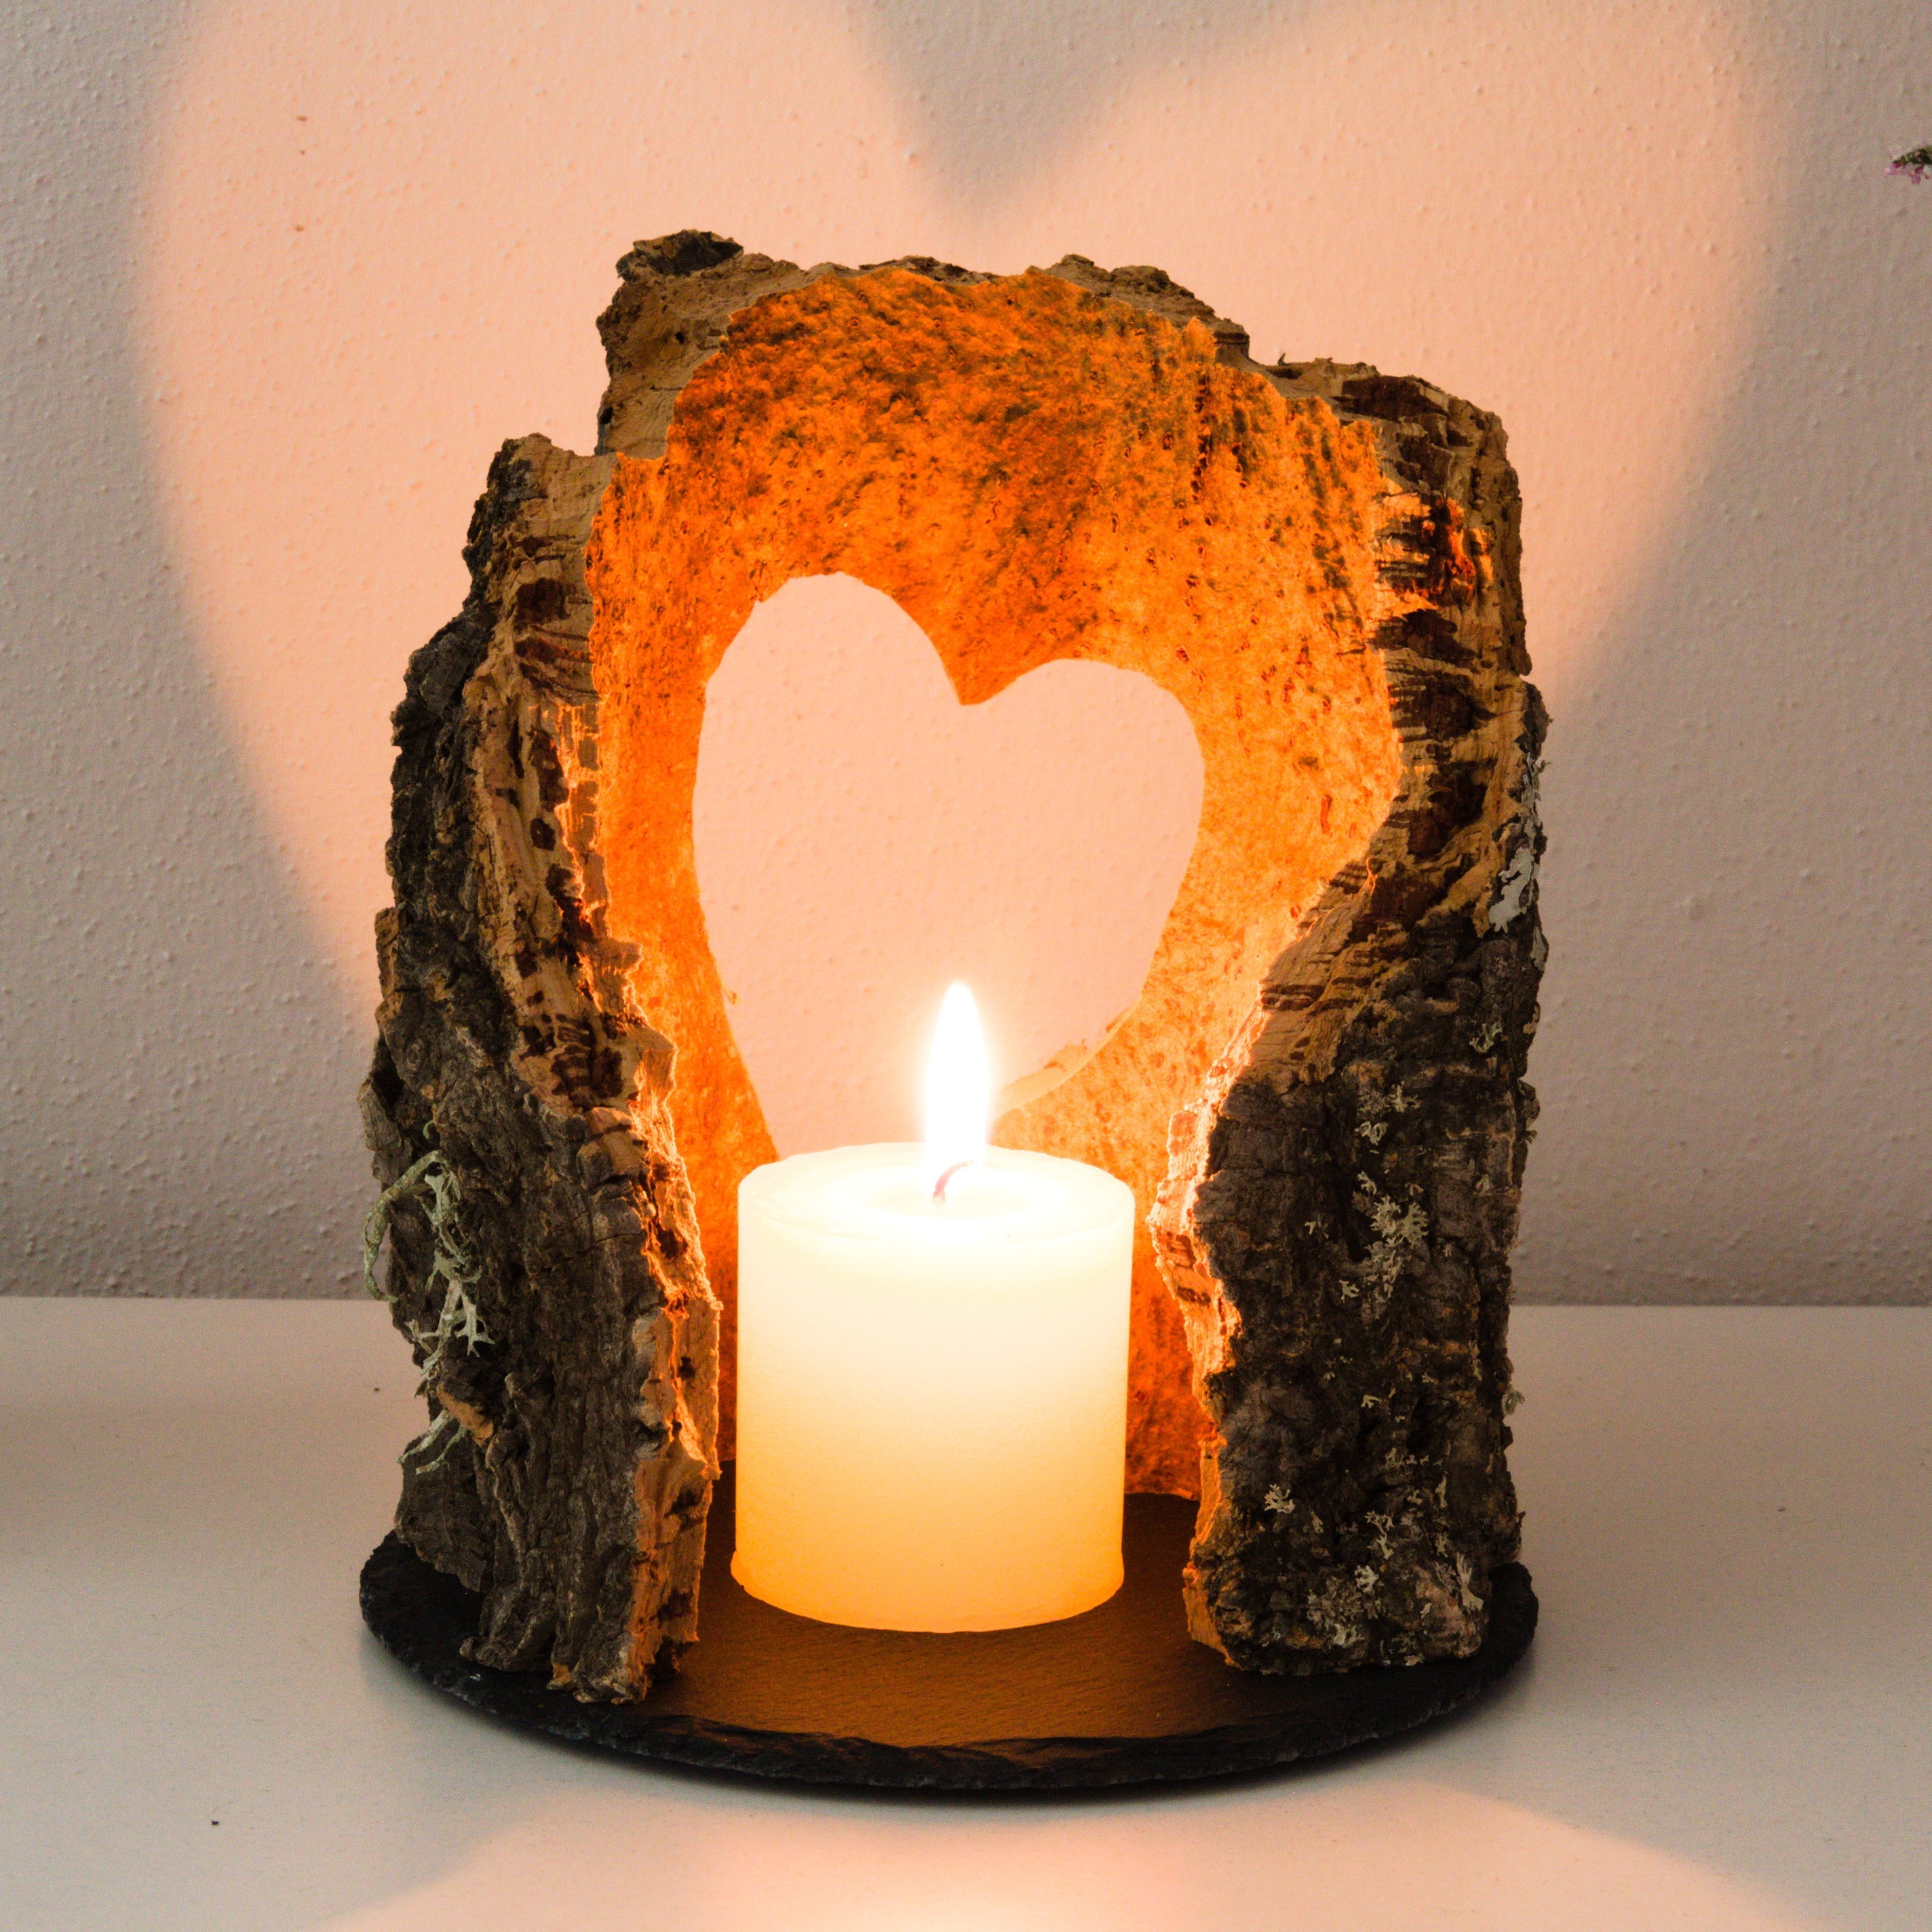 TOP gift idea * verKORKst cork lantern with heart * SPECIAL OFFER from EUR 46.00* unique * fireproof, water-repellent, handmade, sustainable, vegan